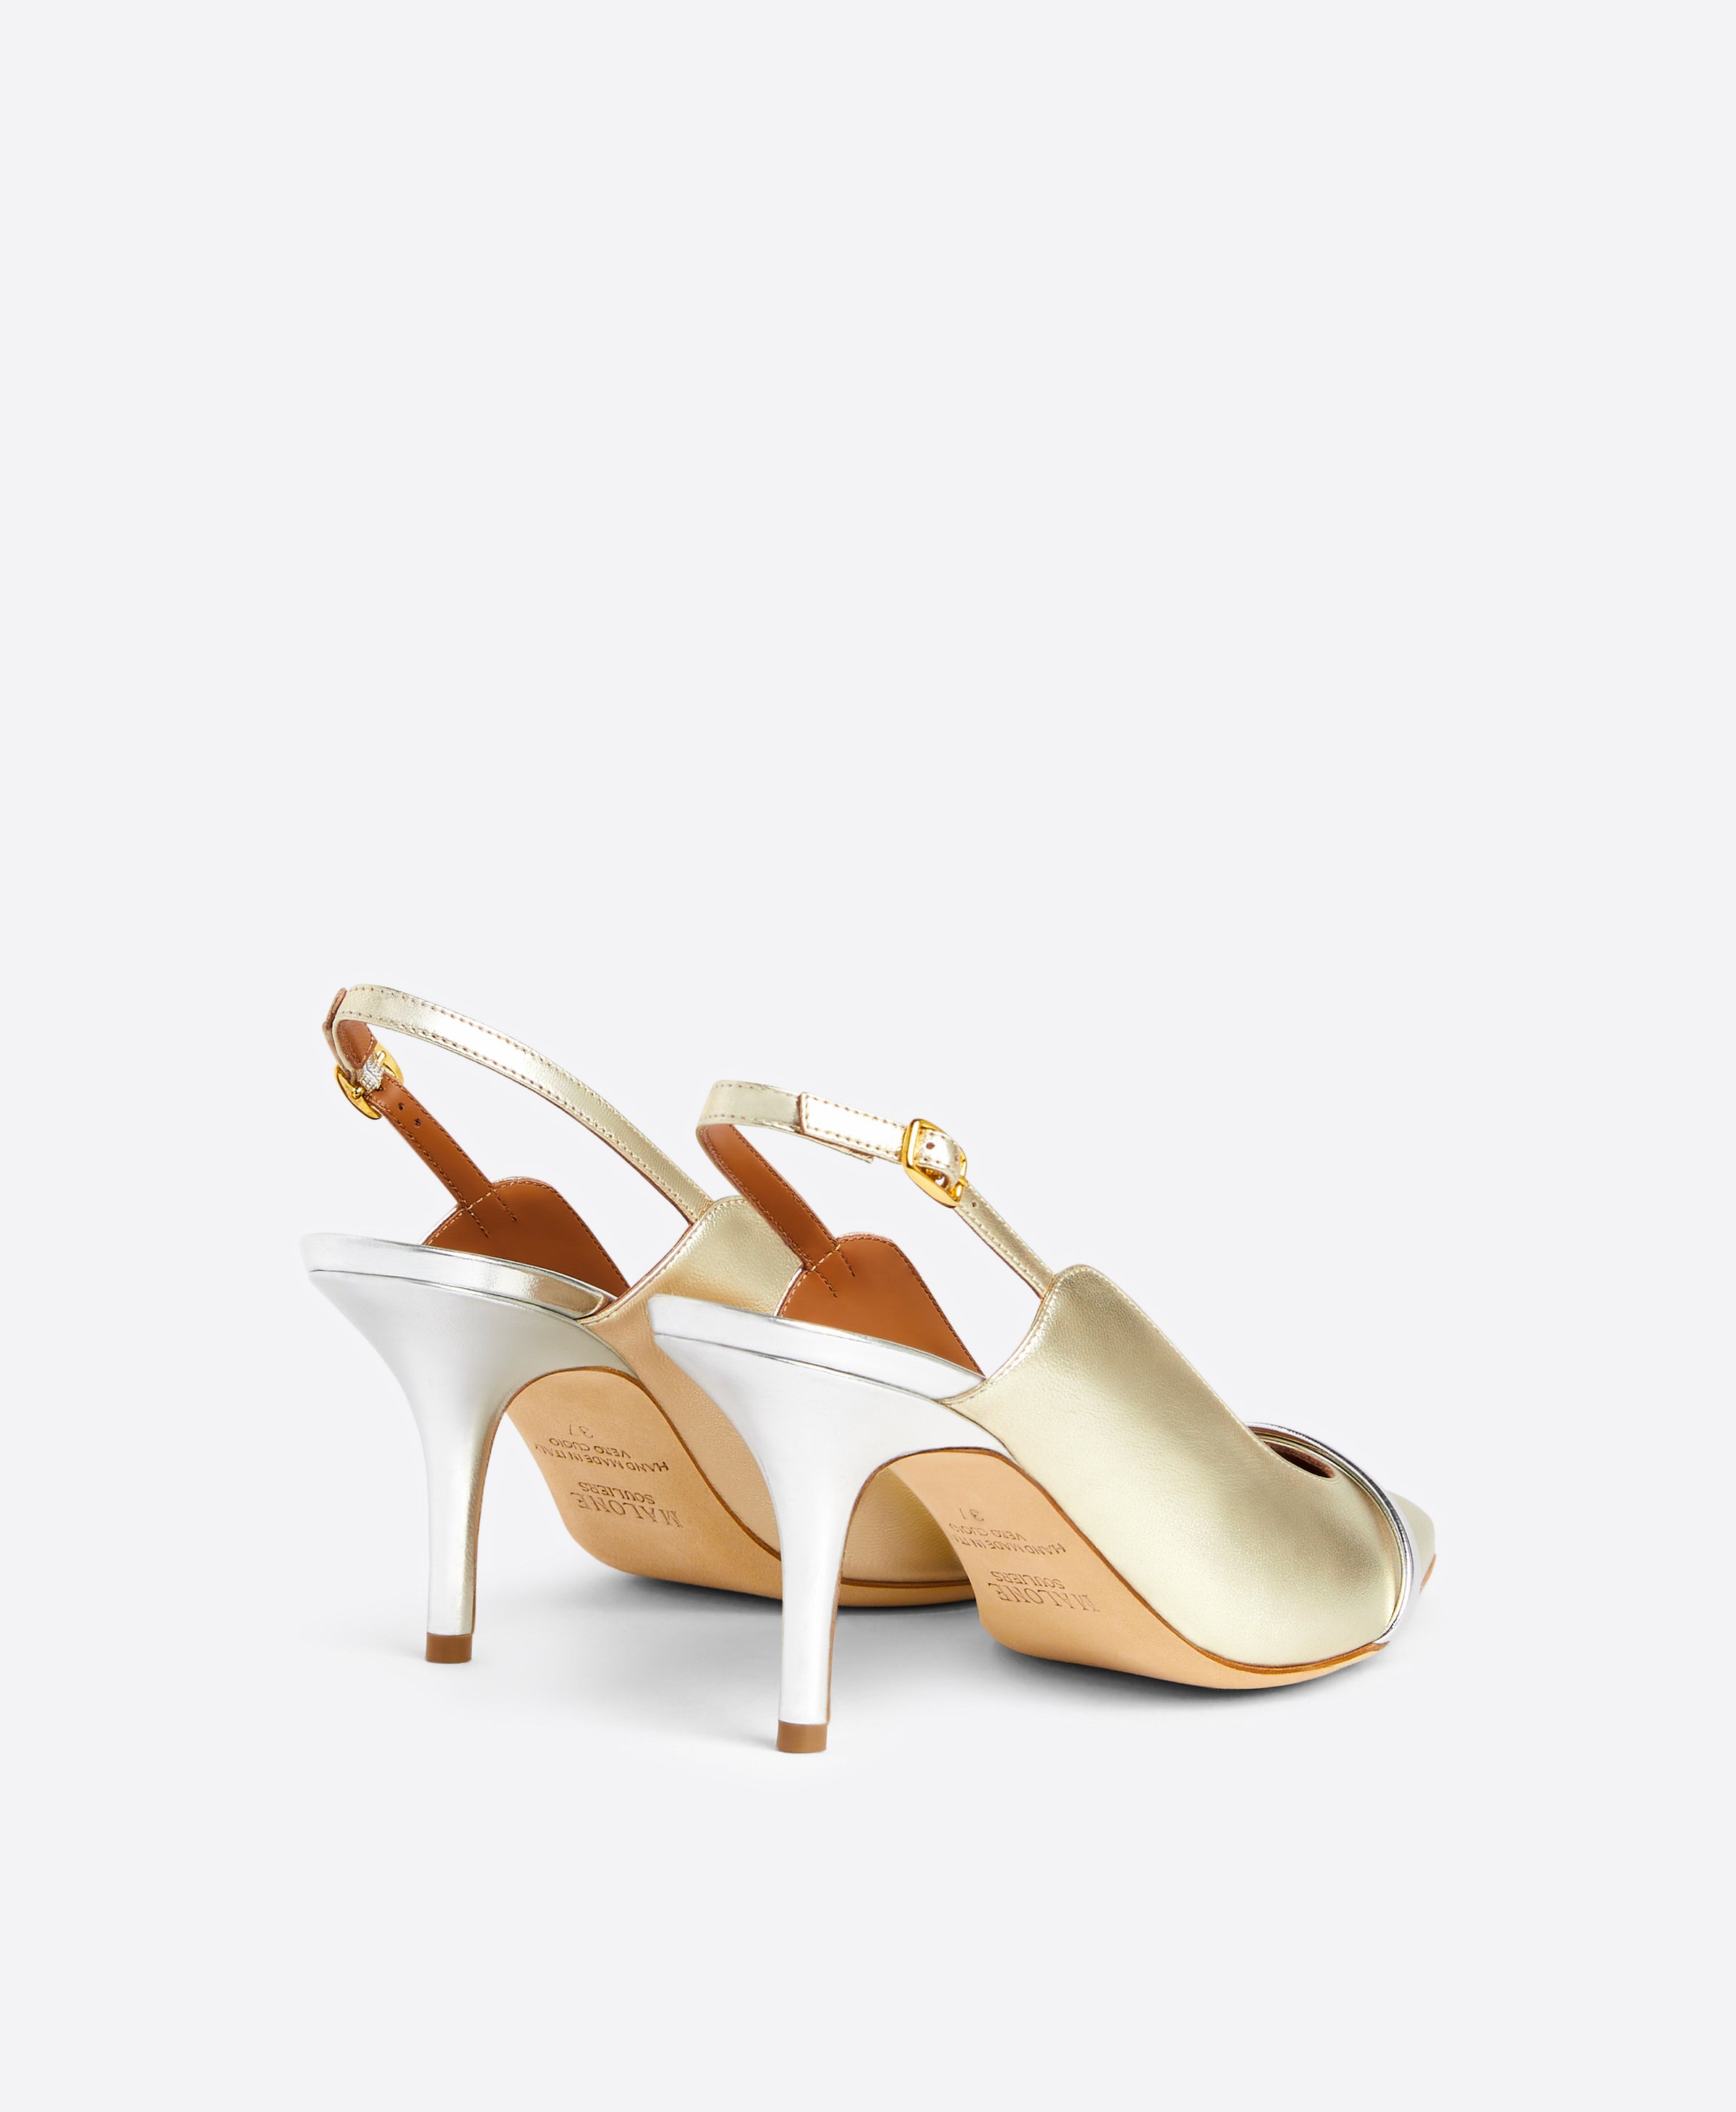 Marion 70 Platino Metallic Leather Slingback Heels | Malone Souliers